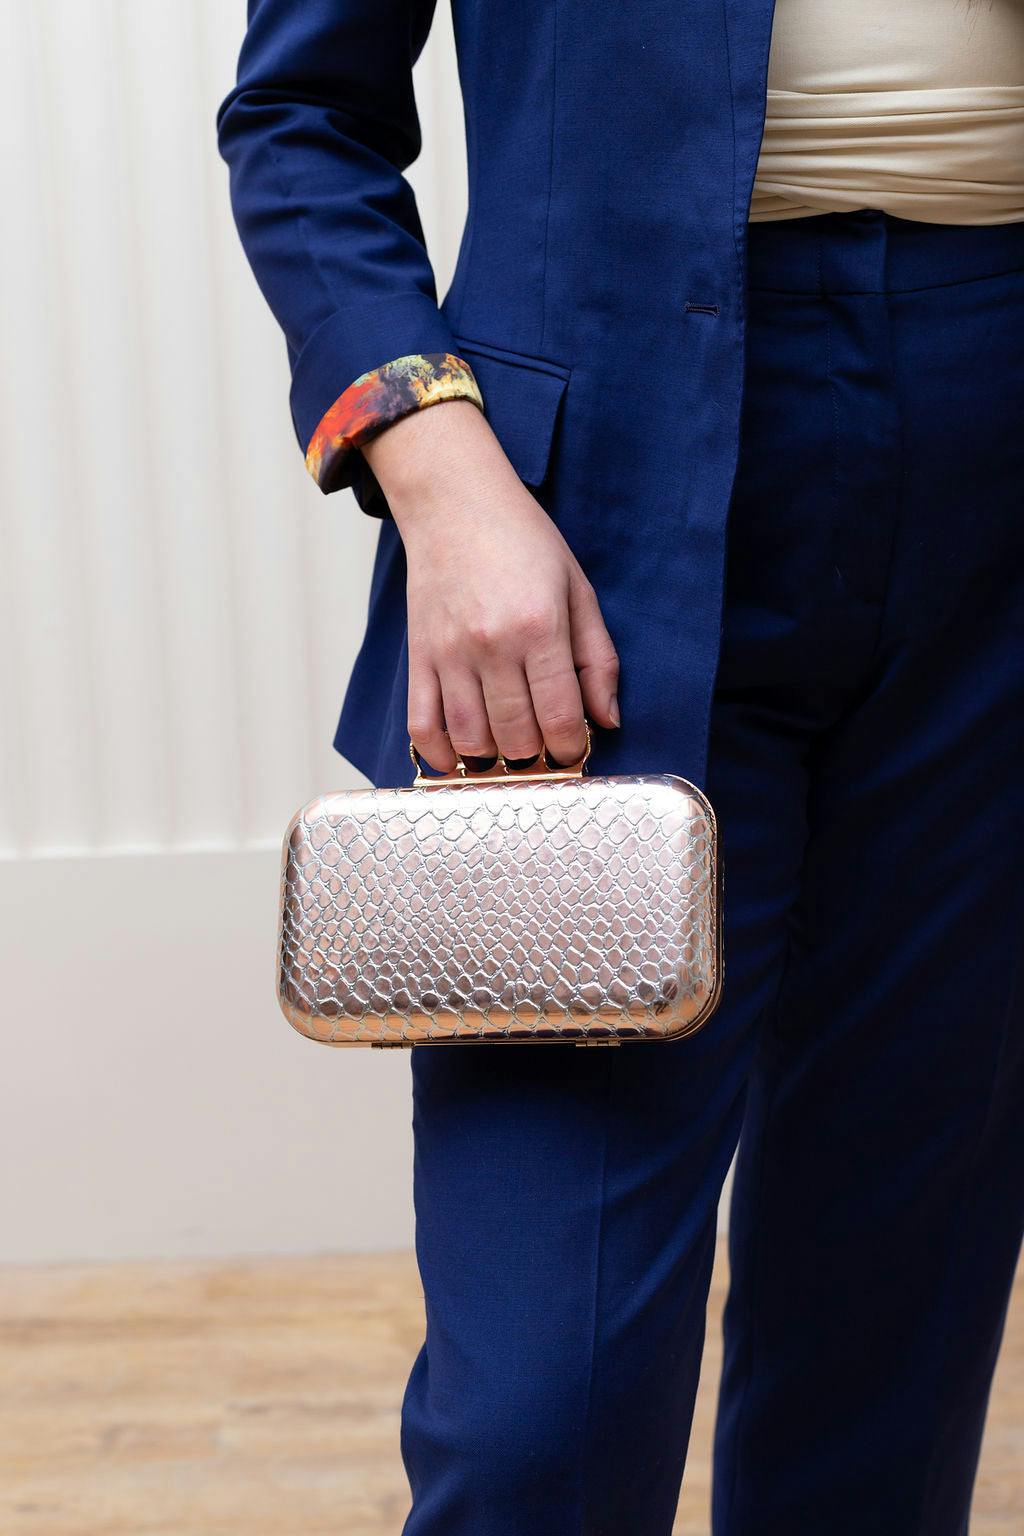 CLASSY CHIC Clutch, a product by Clutcheeet